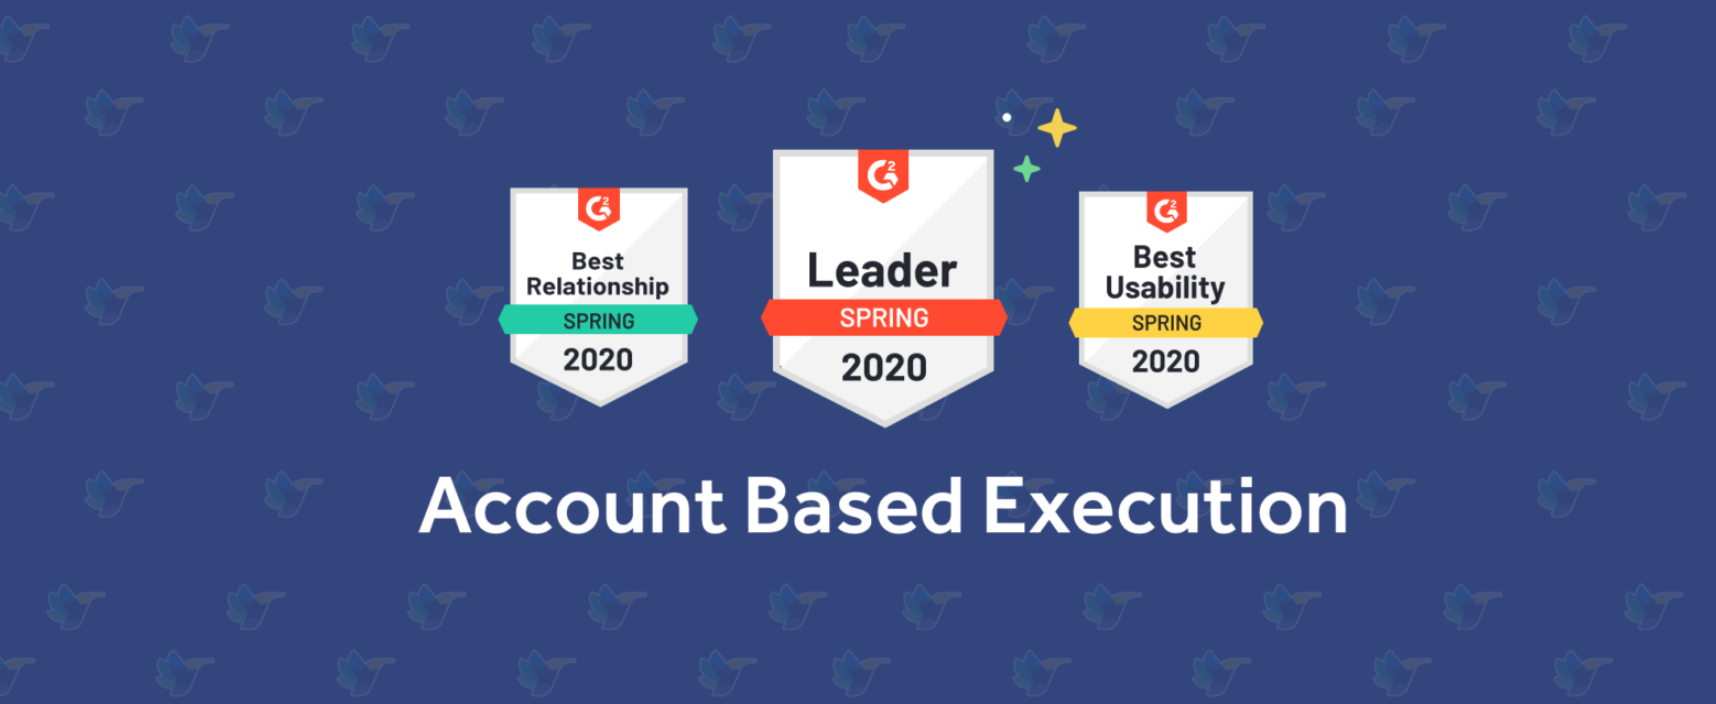 G2 Spring Leader Account Based Execution